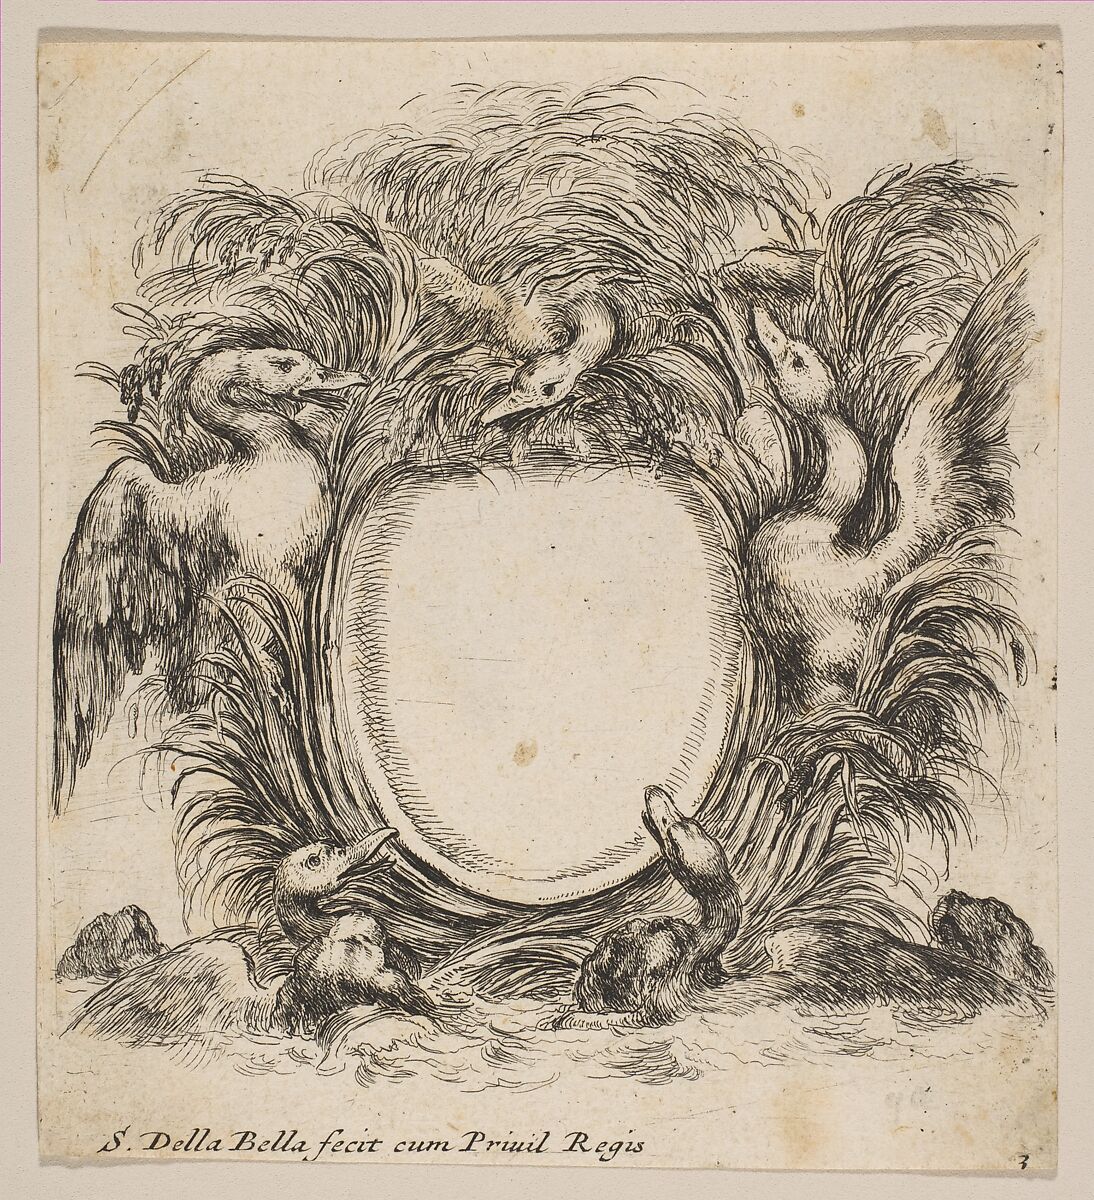 Cartouche Framed by Ducks and Weeds, Stefano della Bella (Italian, Florence 1610–1664 Florence), Etching; first state 